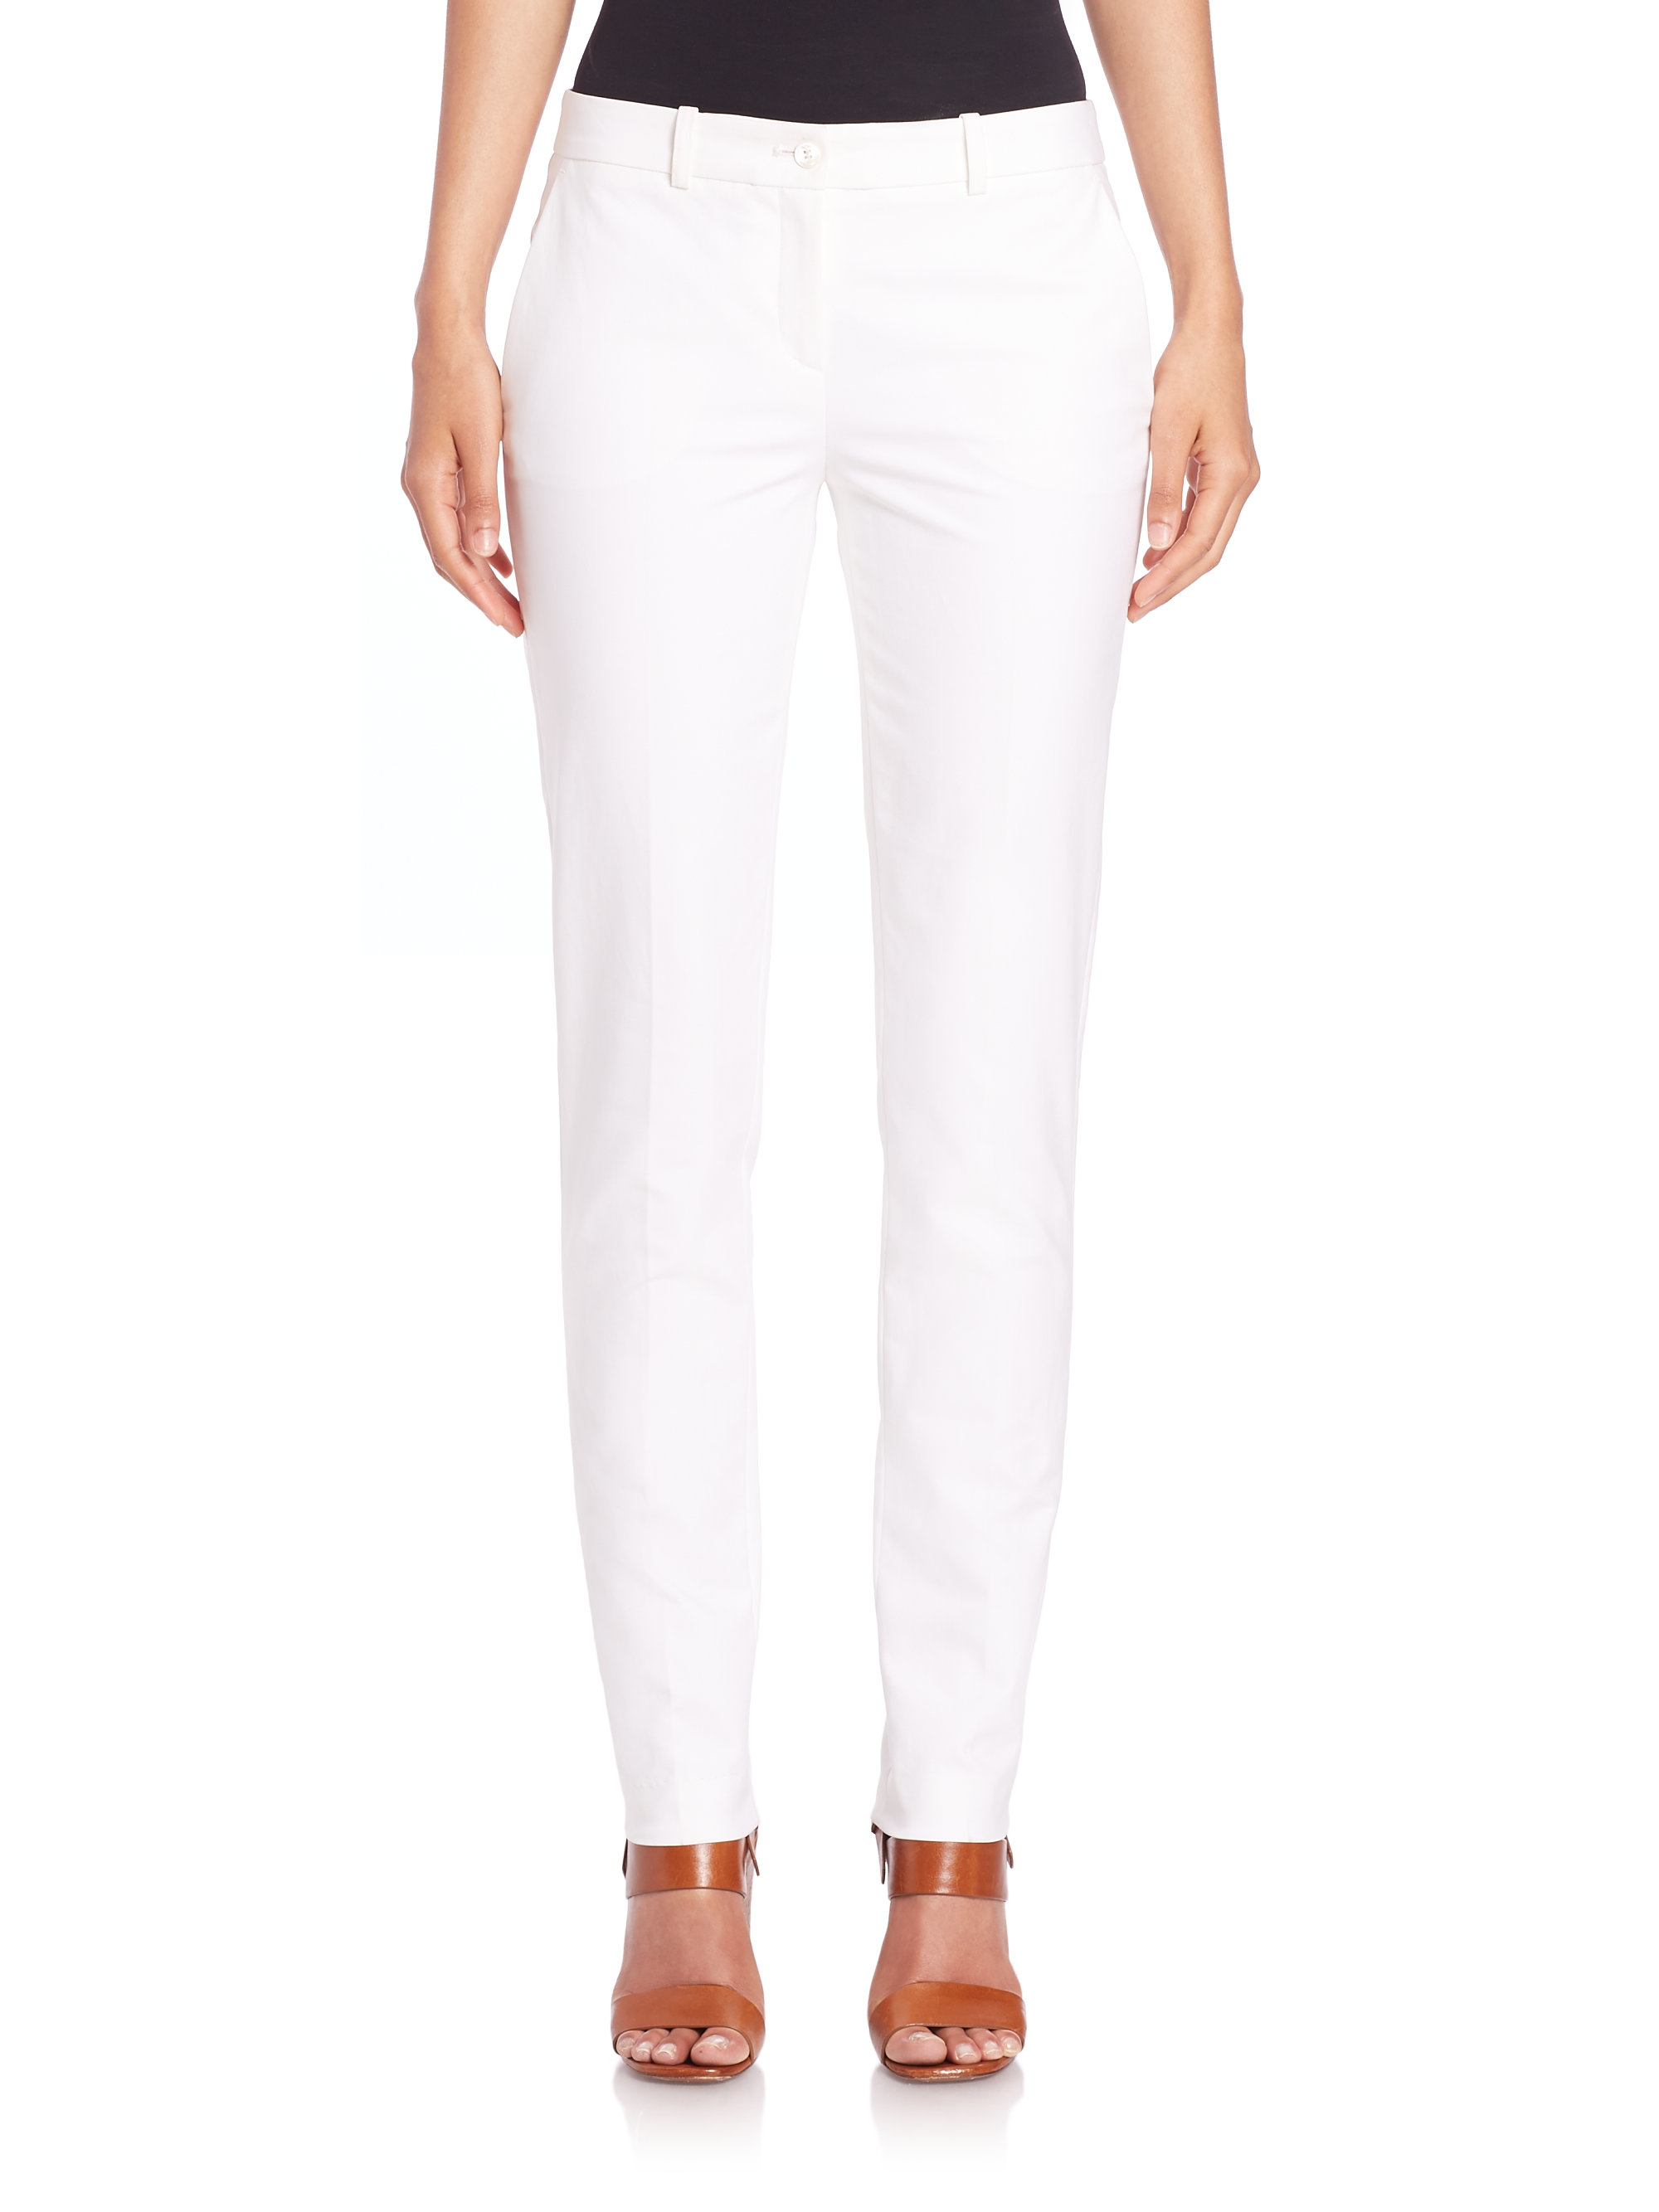 Lyst - Michael Kors Stretch-cotton Skinny Pants in White